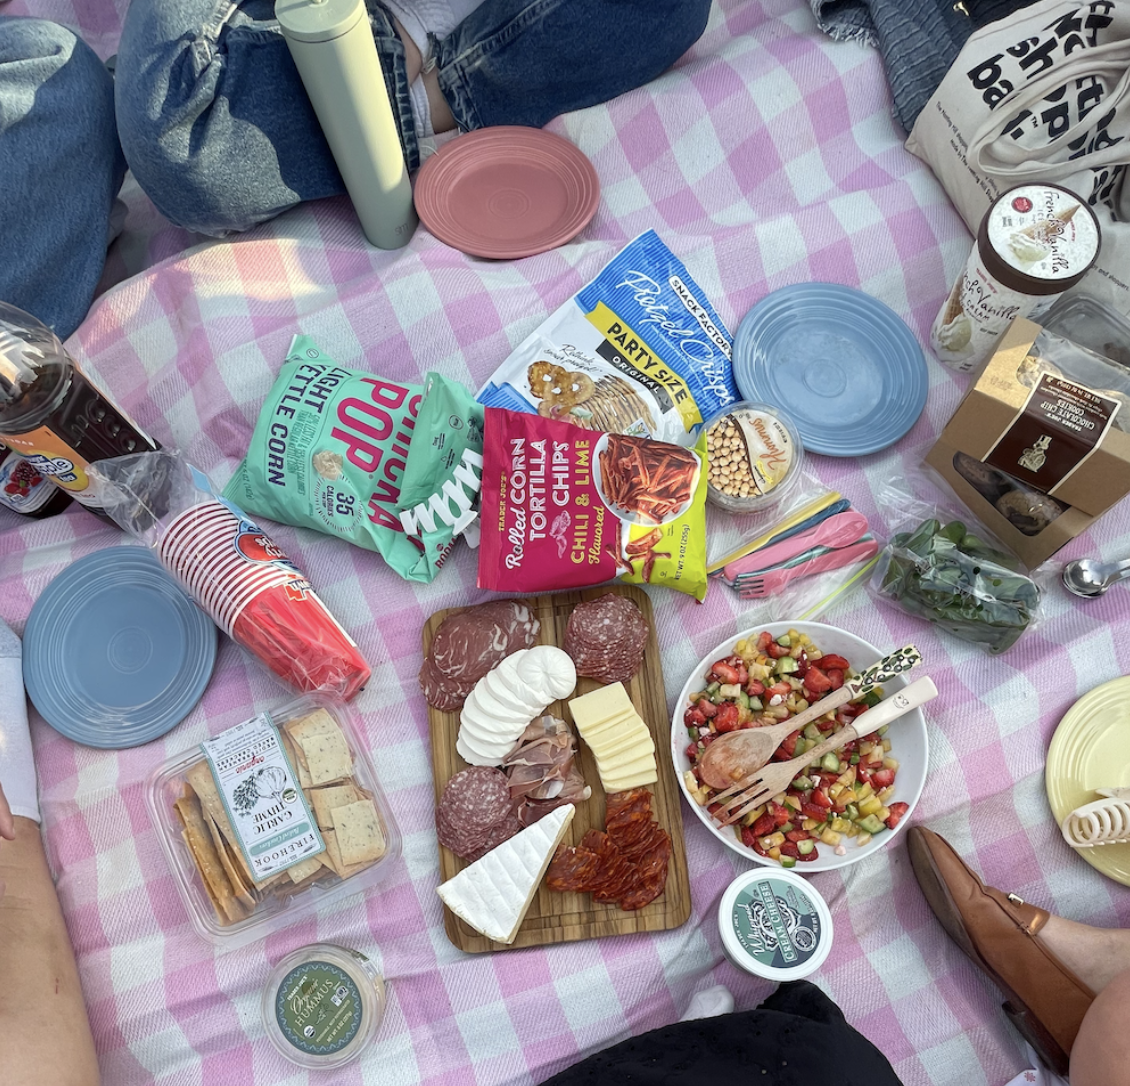 Cheese, snacks, and plates on a picnic blanket.